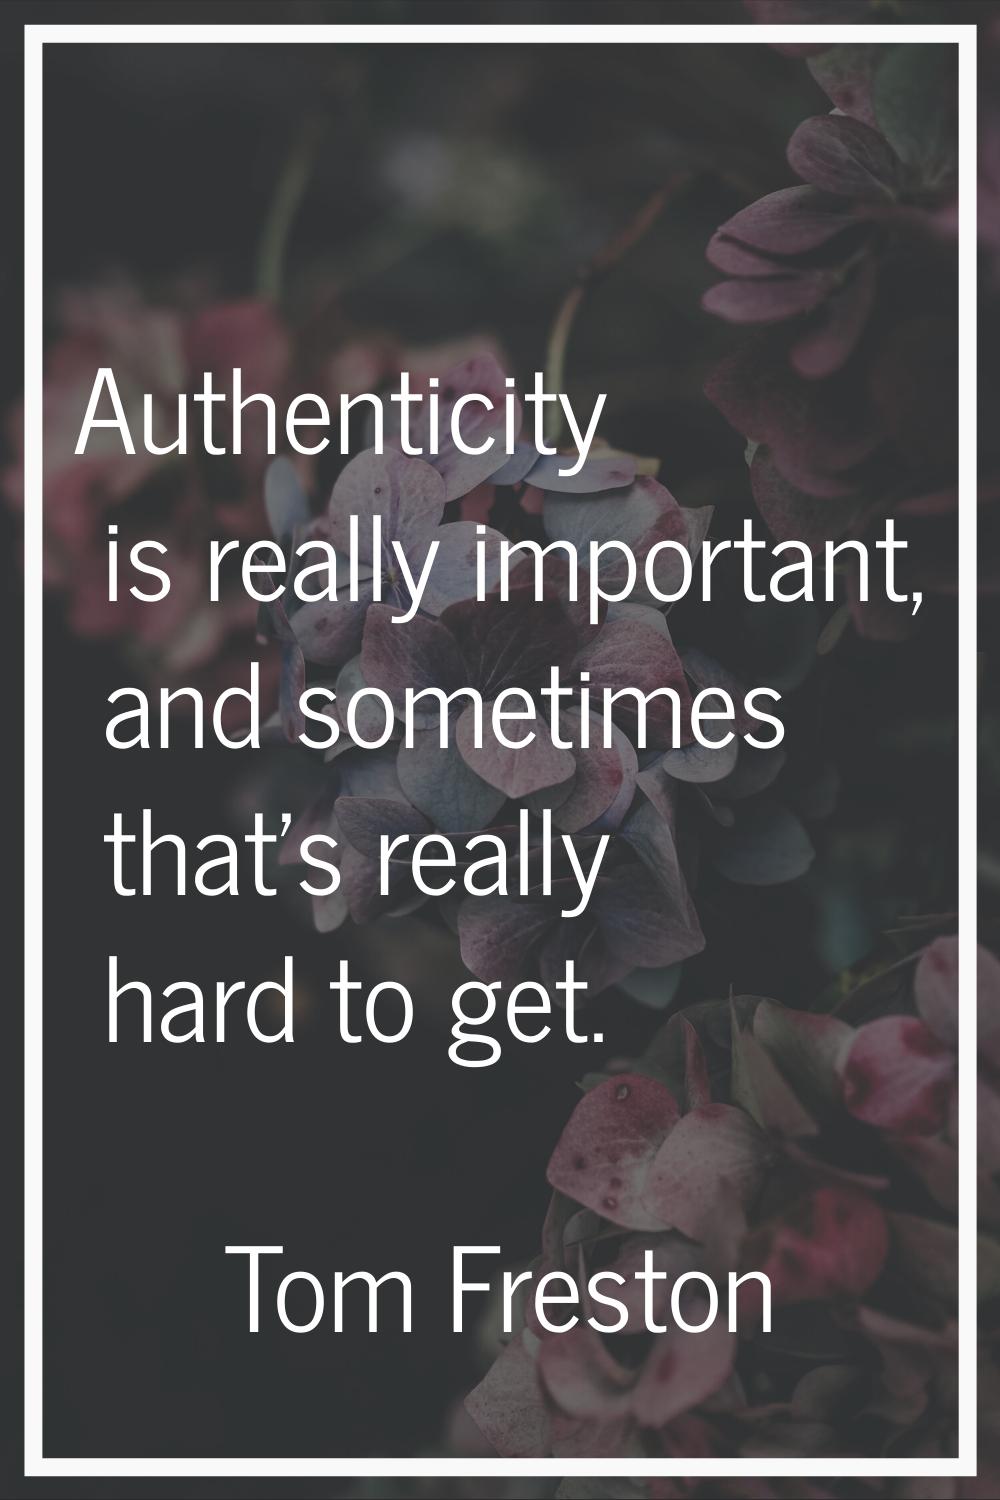 Authenticity is really important, and sometimes that's really hard to get.